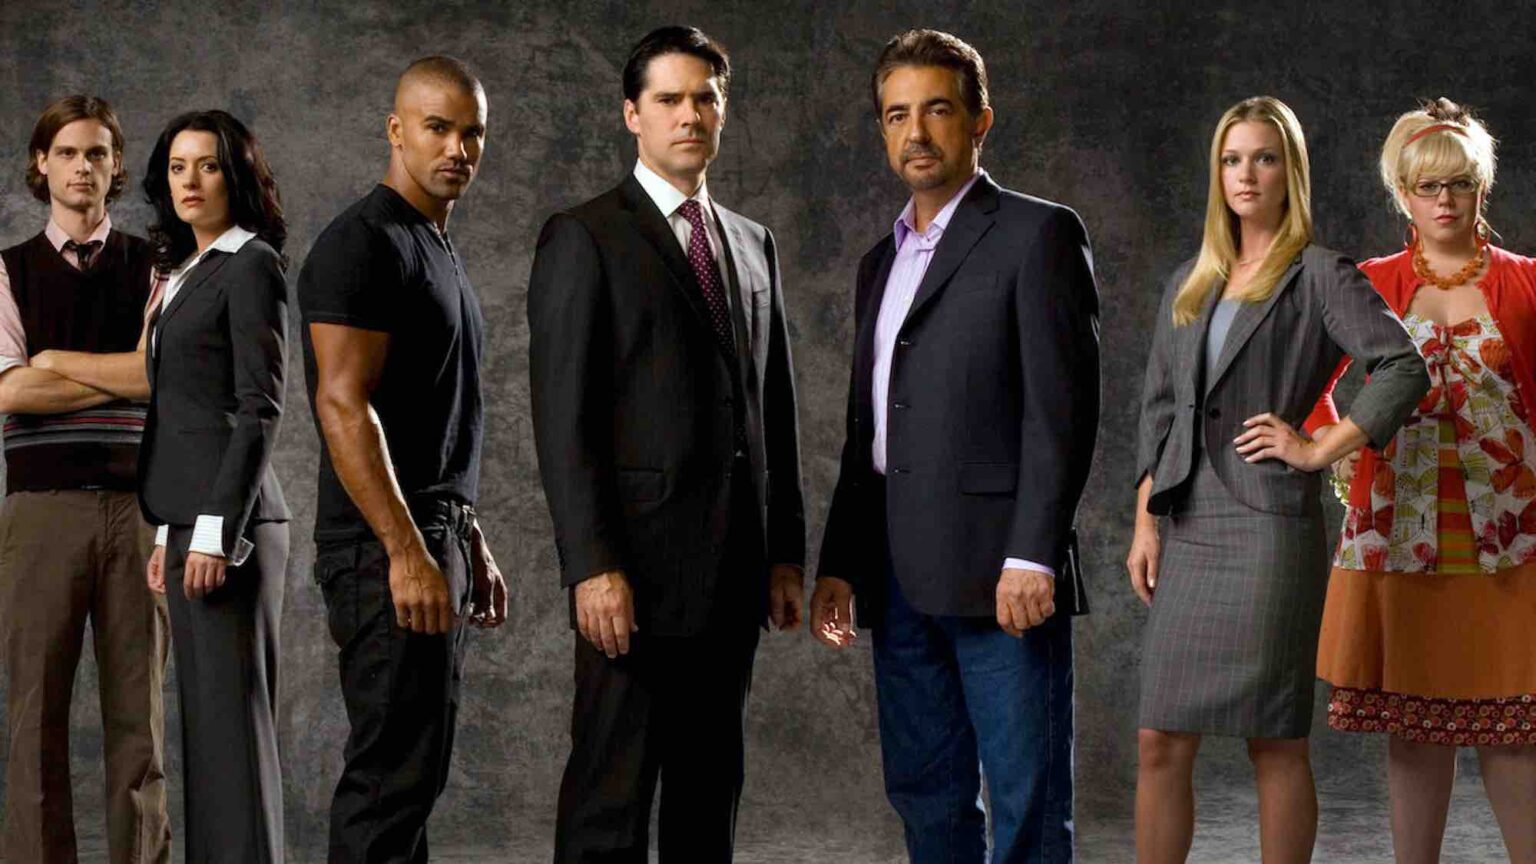 Which 'Criminal Minds' guest stars played the evil characters the best? Hunt for the killers with a list of the best at playing bad.